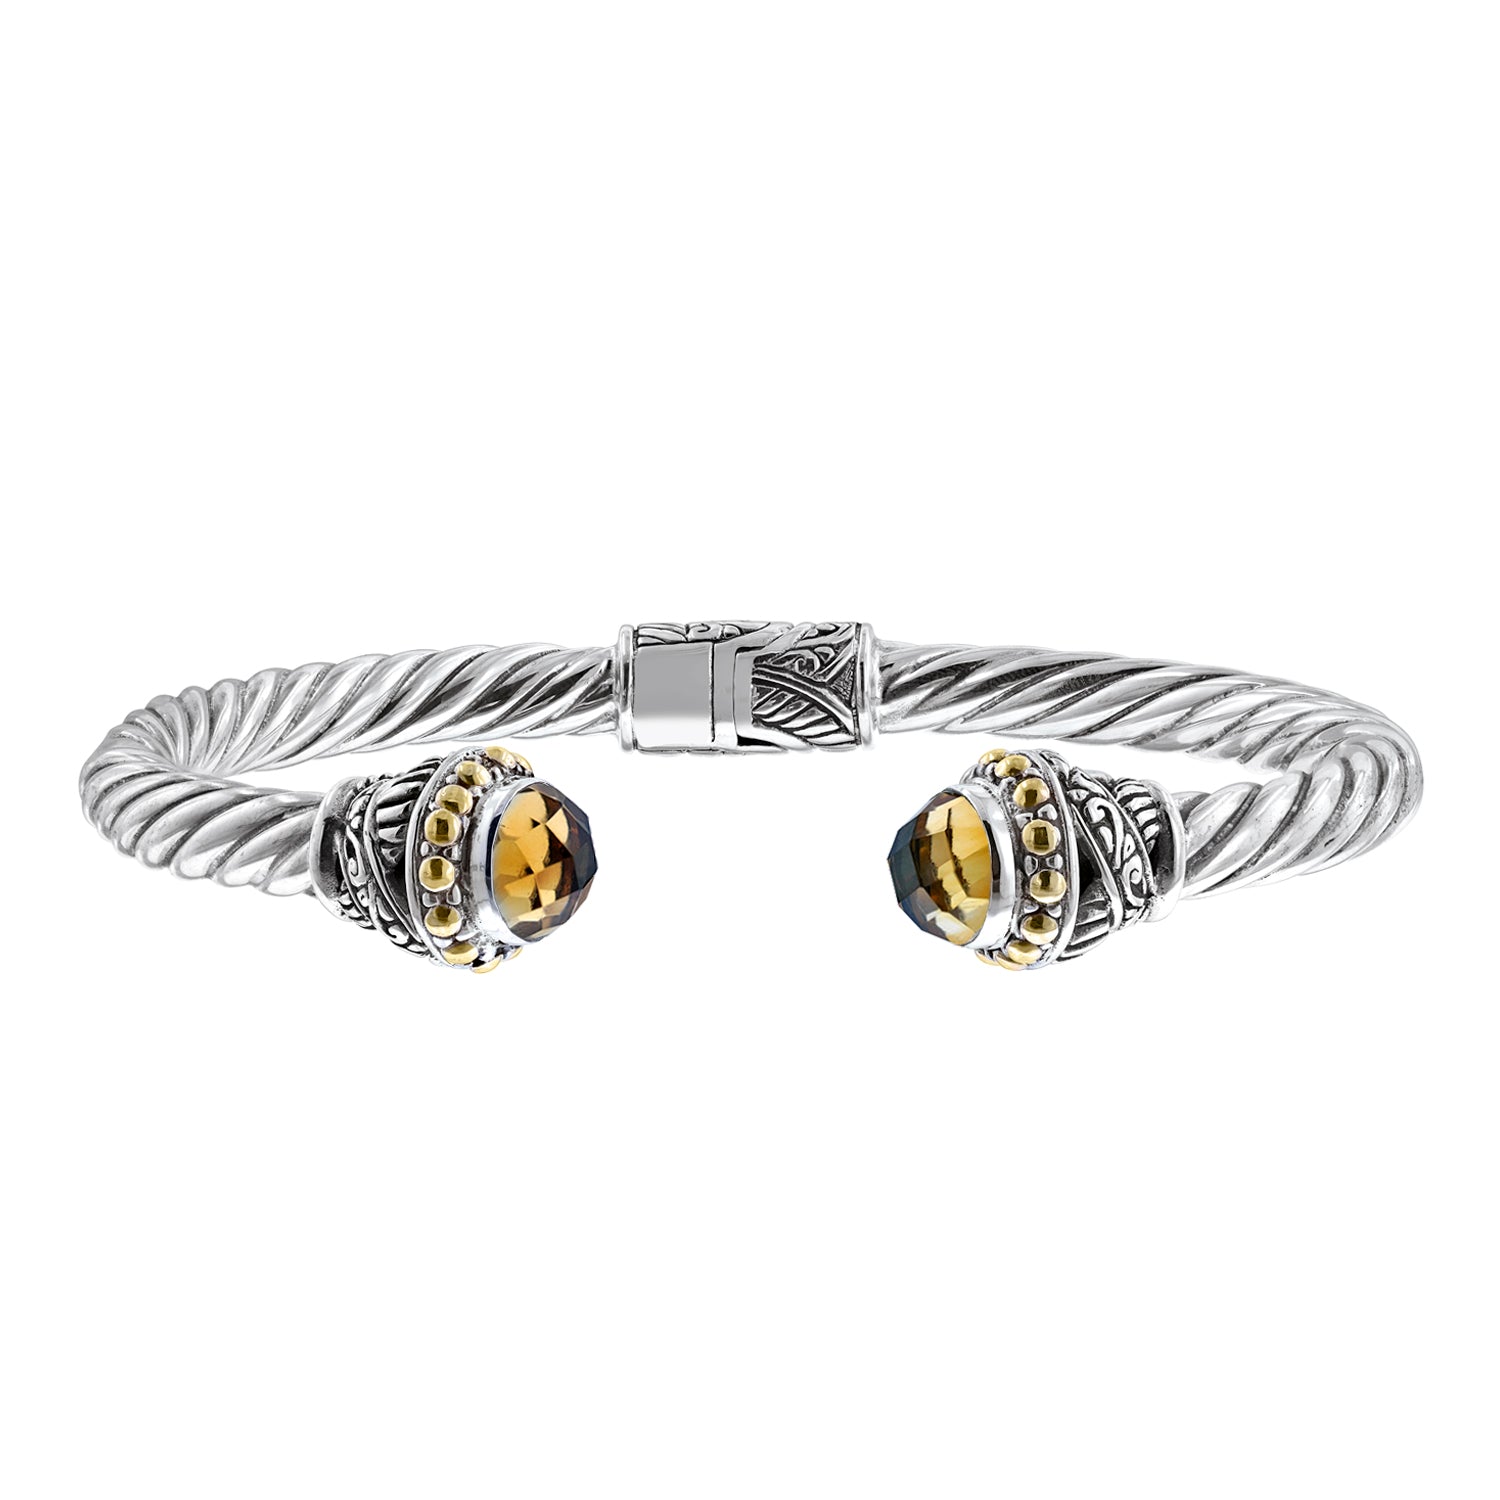 Sterling Silver Citrine Bali Cuff Cable Bracelet with 18K Gold Accents